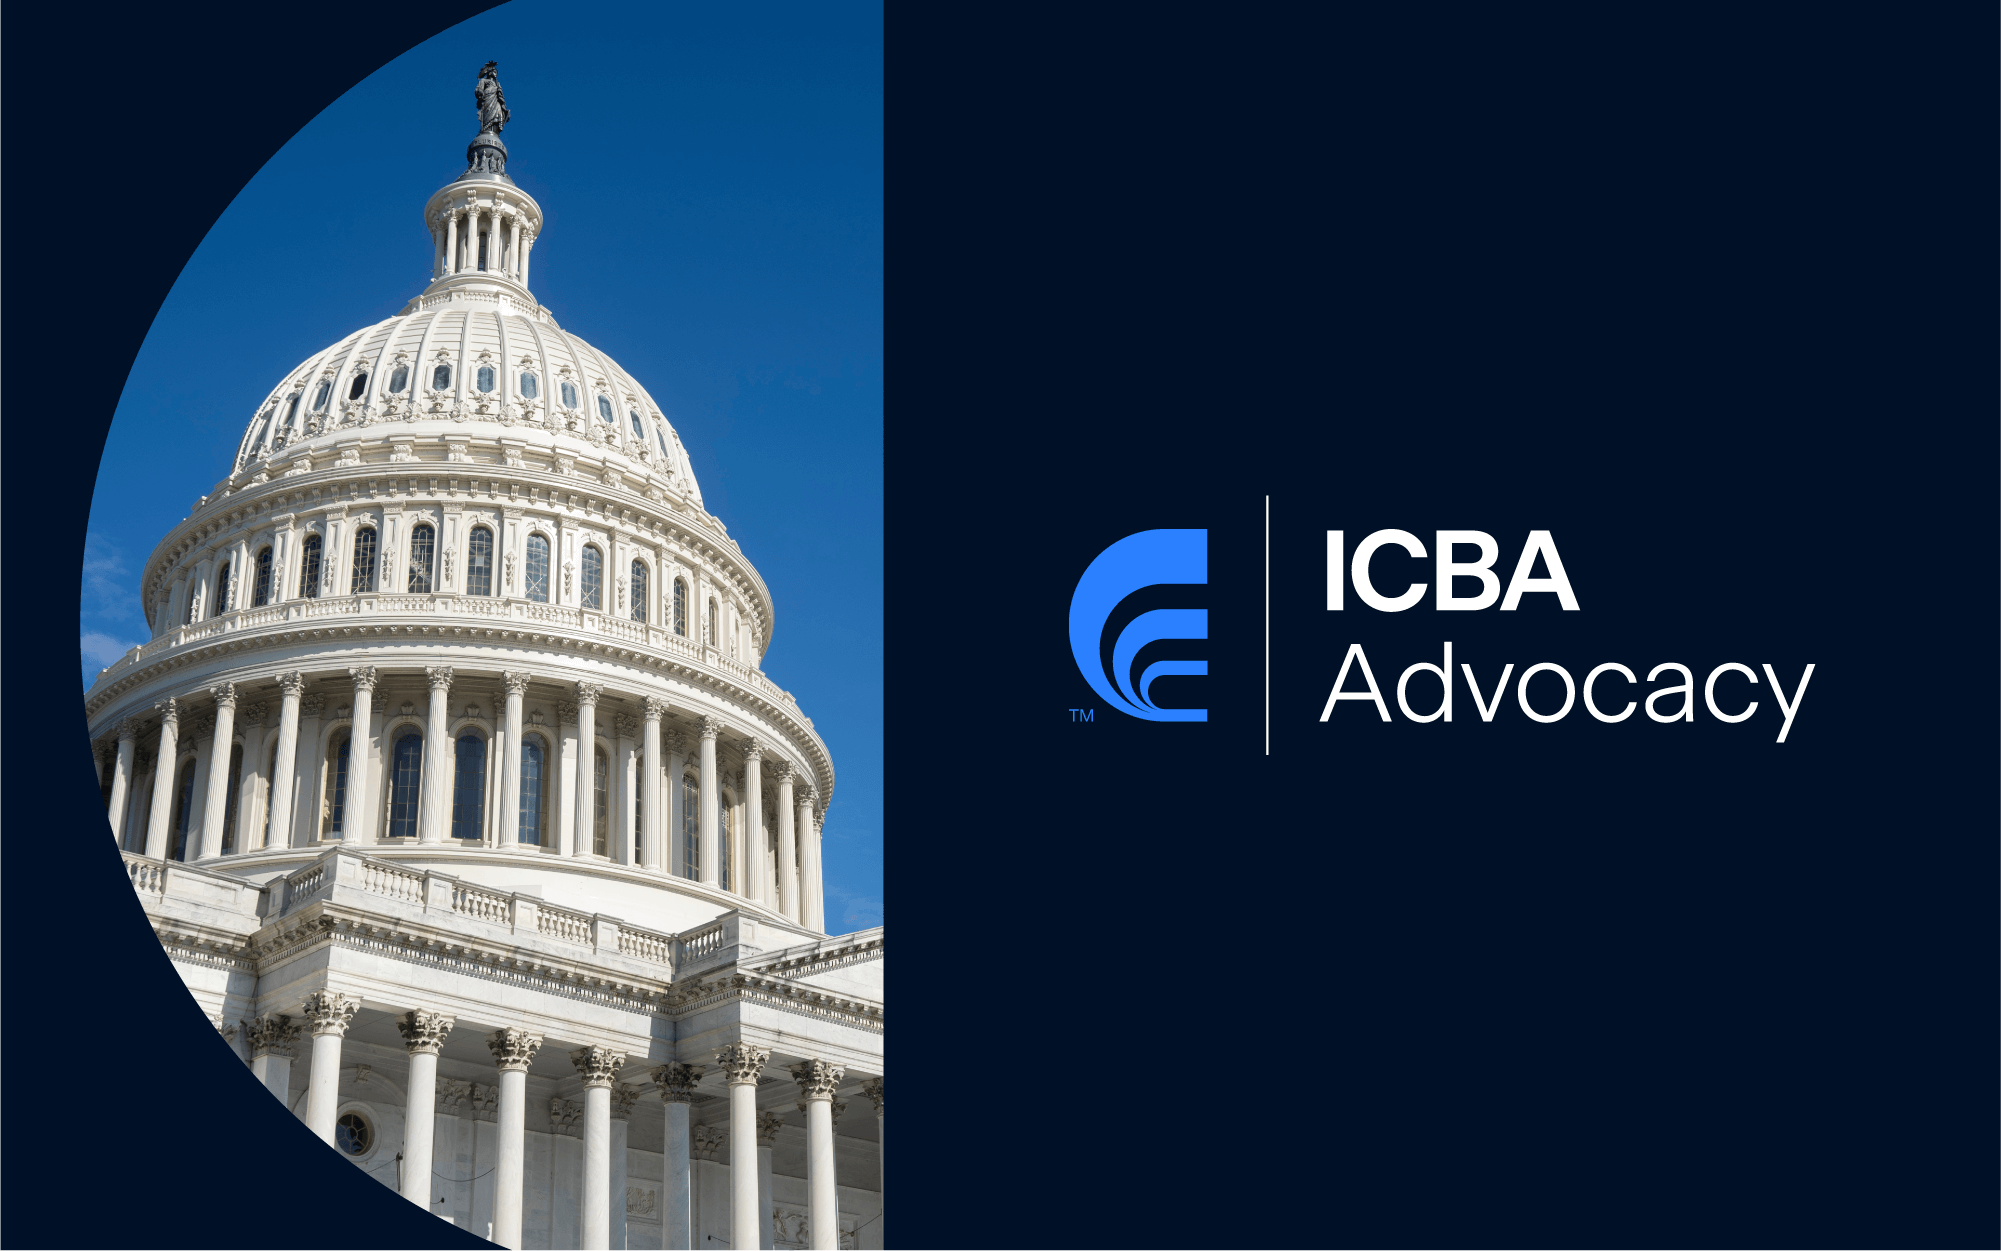 ICBA Advocacy Capitol Building